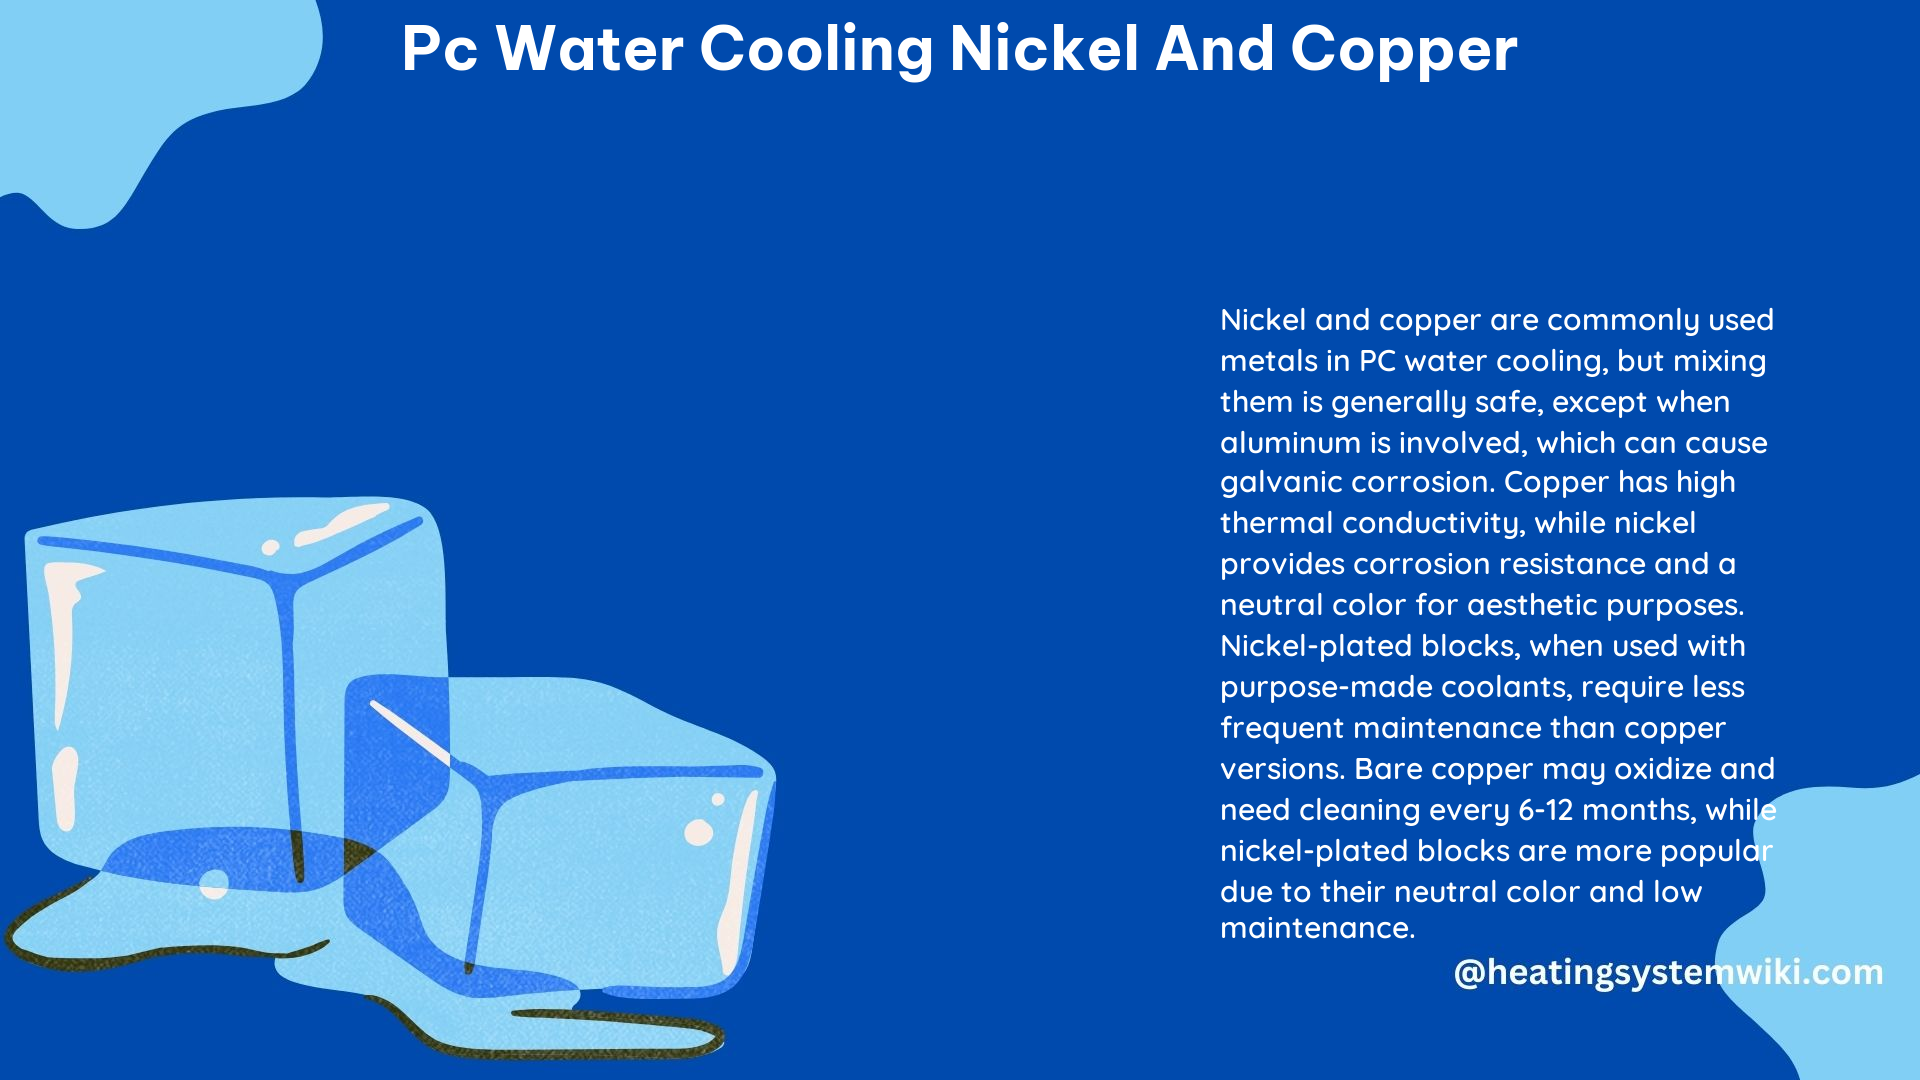 PC Water Cooling Nickel and Copper